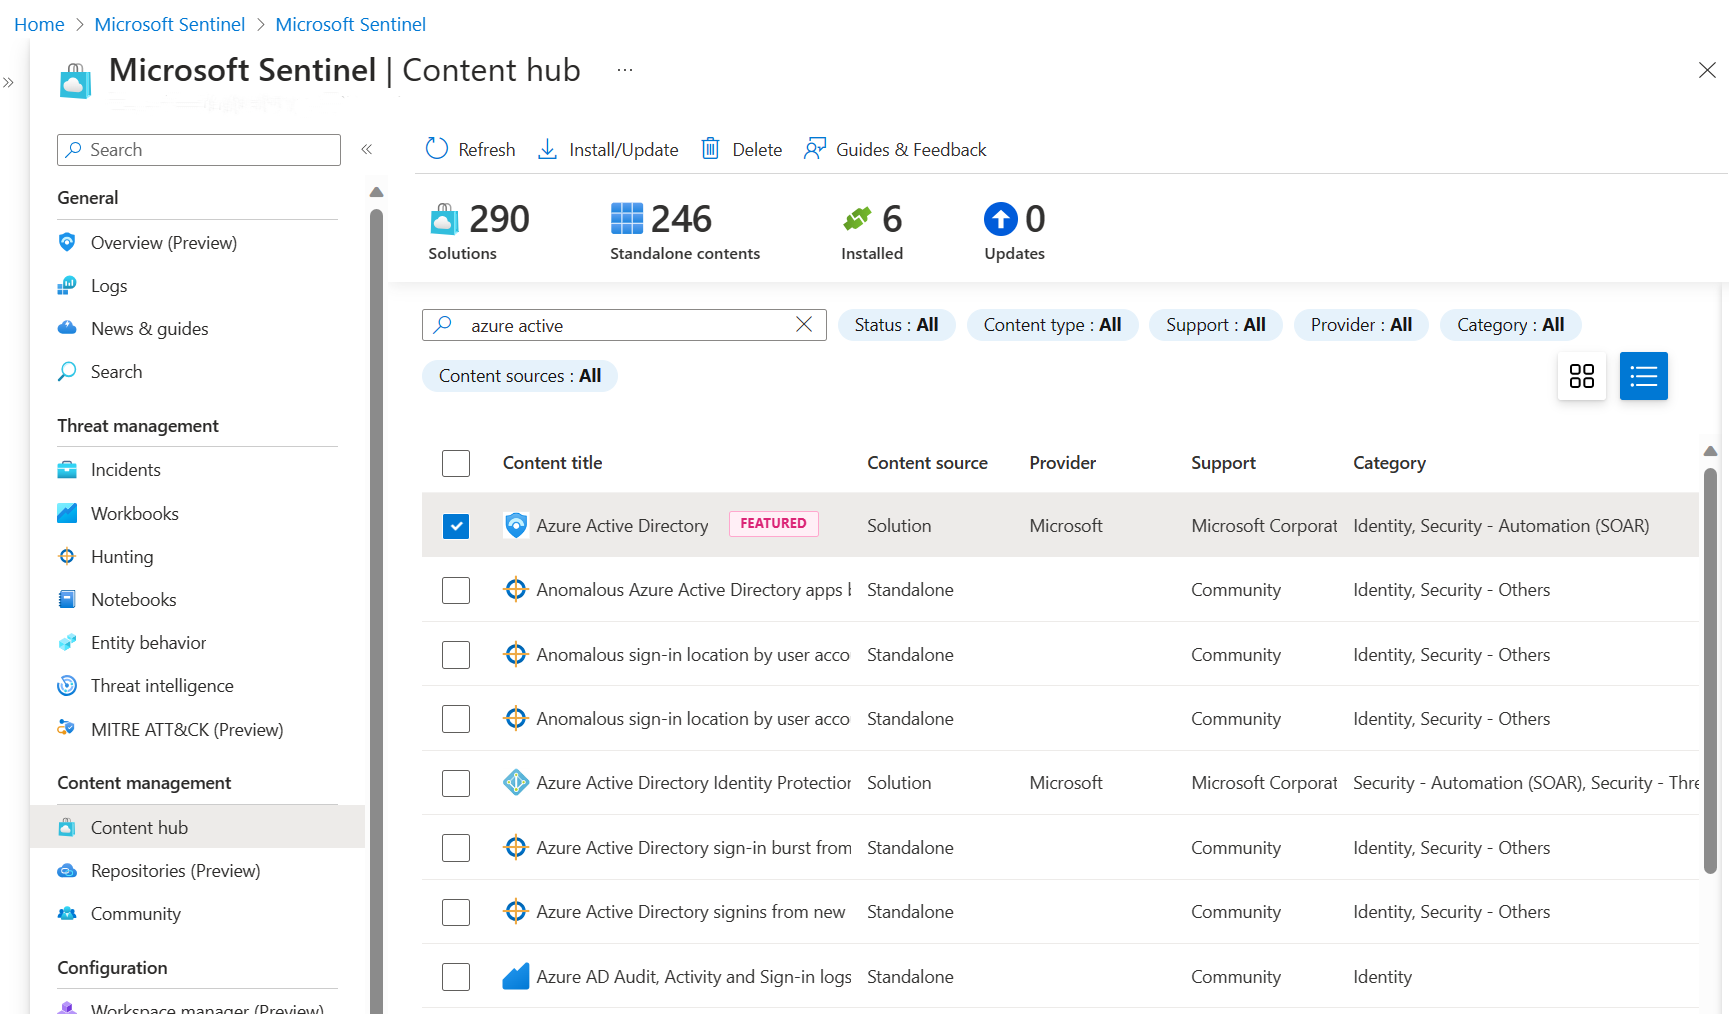 Screenshot of the content hub page with Microsoft Entra ID selected.